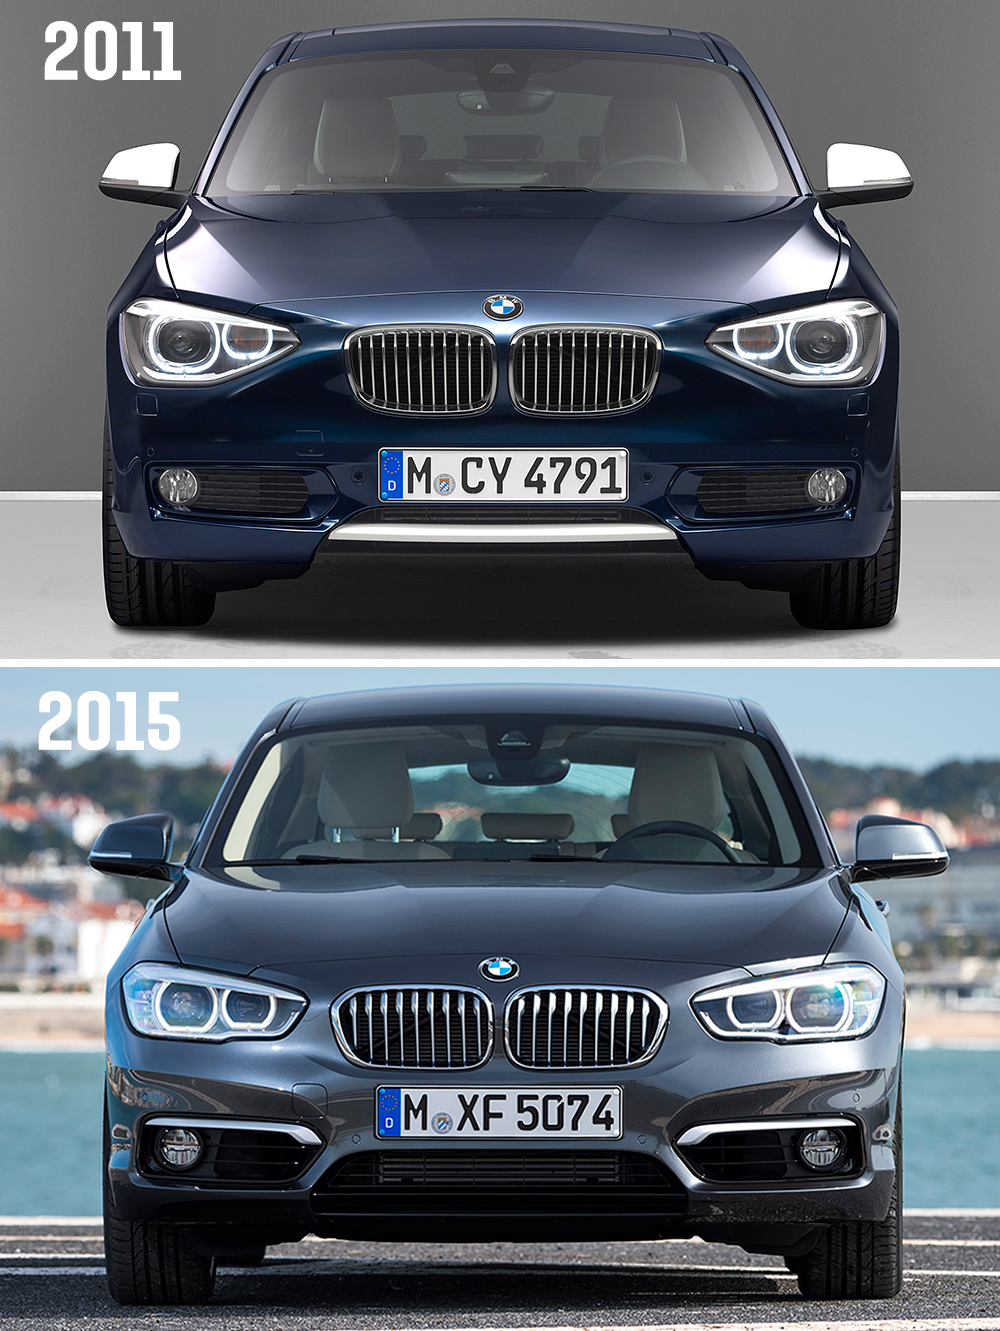 BMW 1-series old-vs new styling changes